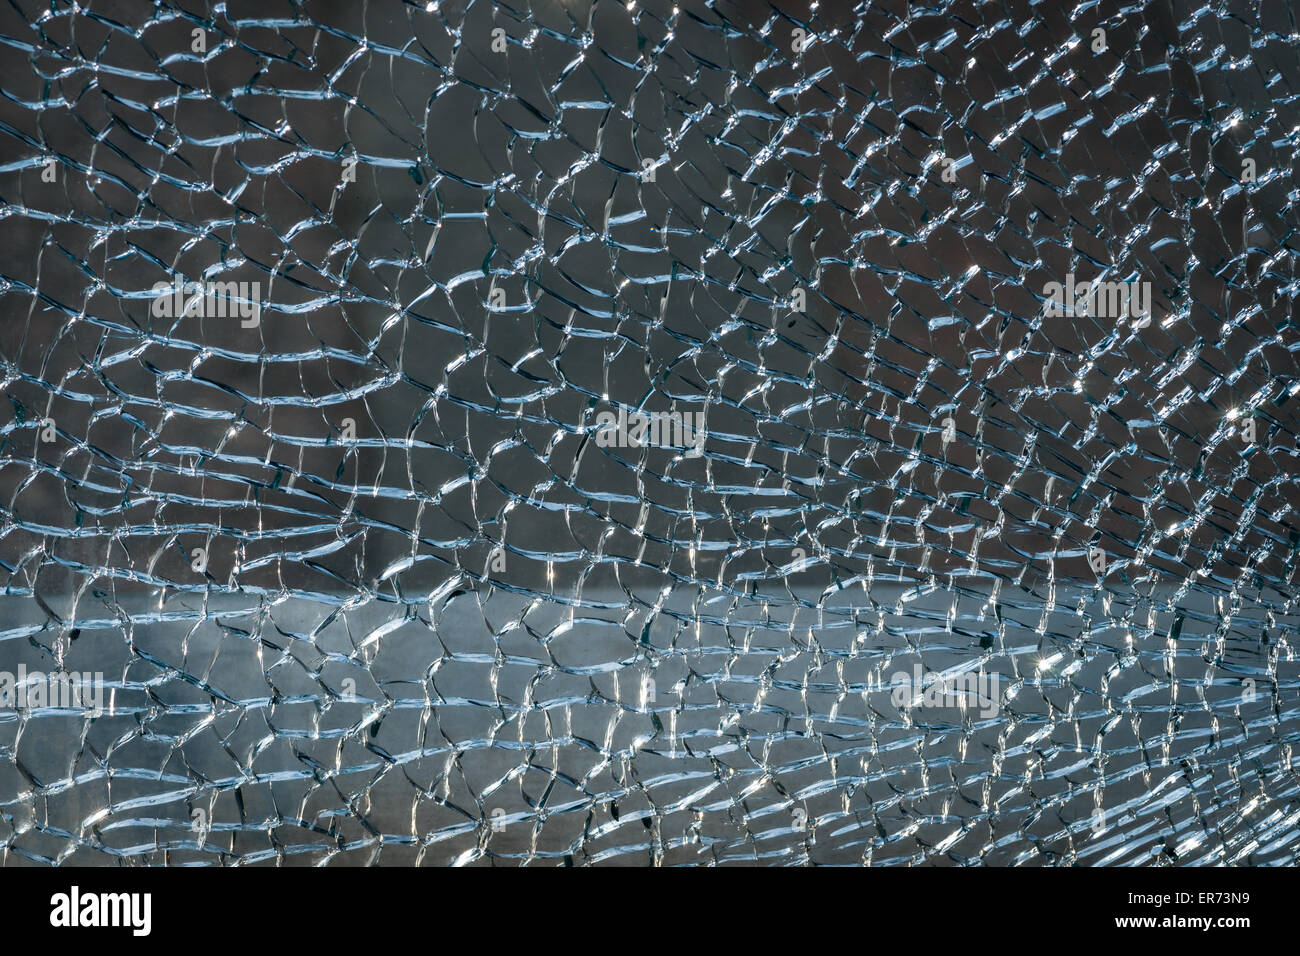 Cracked ice shining glass texture background wallpaper. Stock Photo